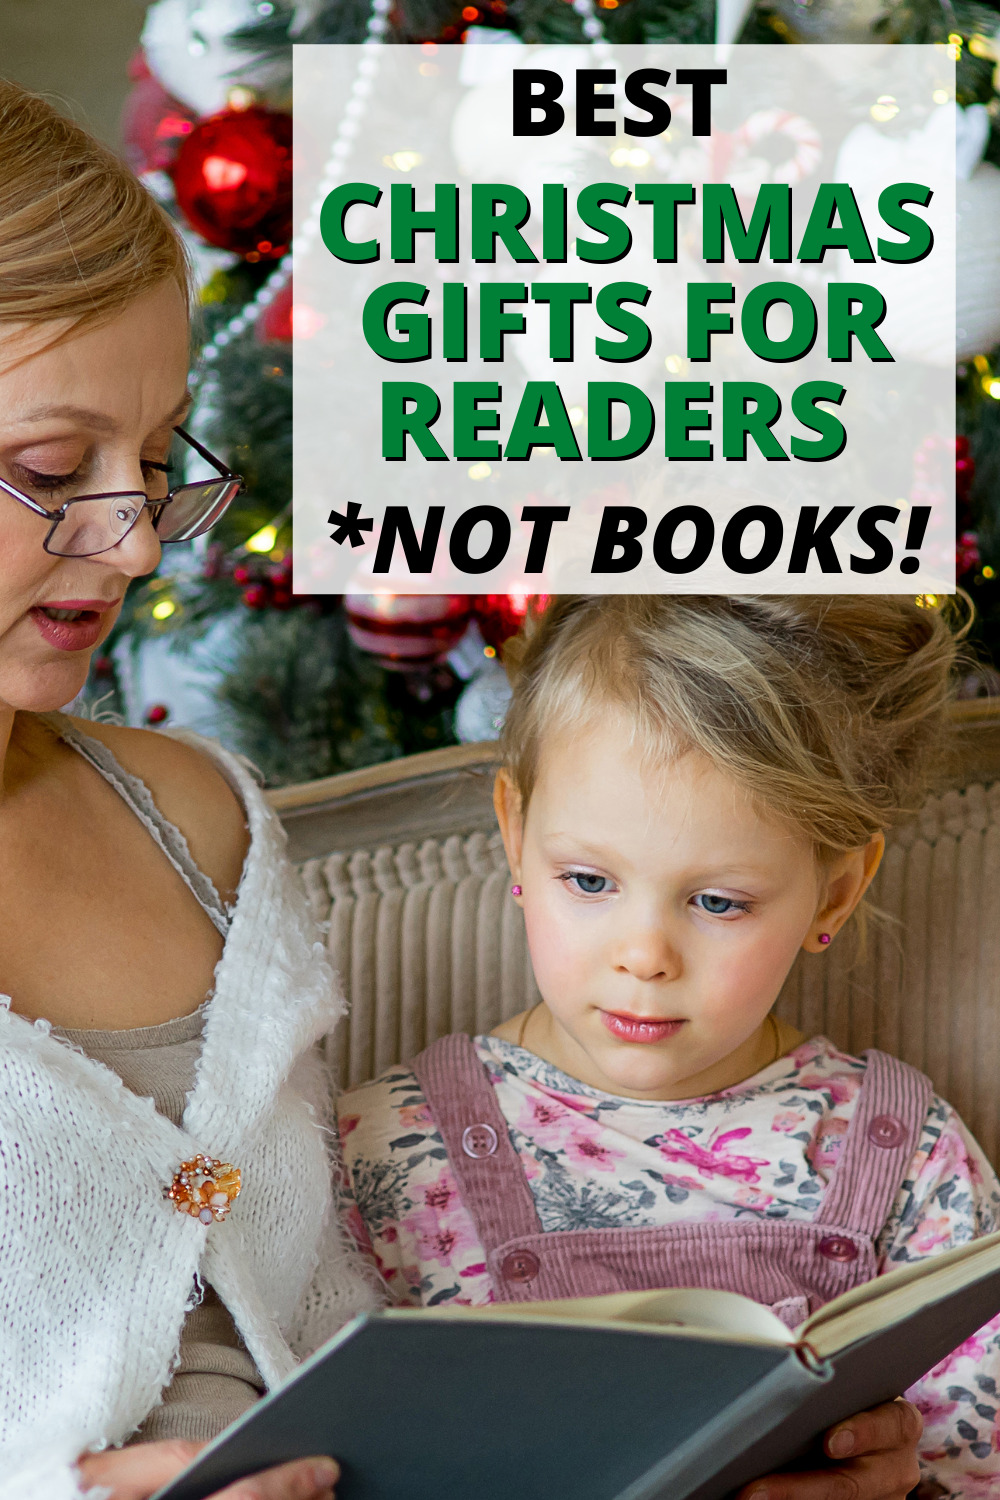 CHRISTMAS GIFTS FOR READERS BOOK LOVERS OF ALL AGES